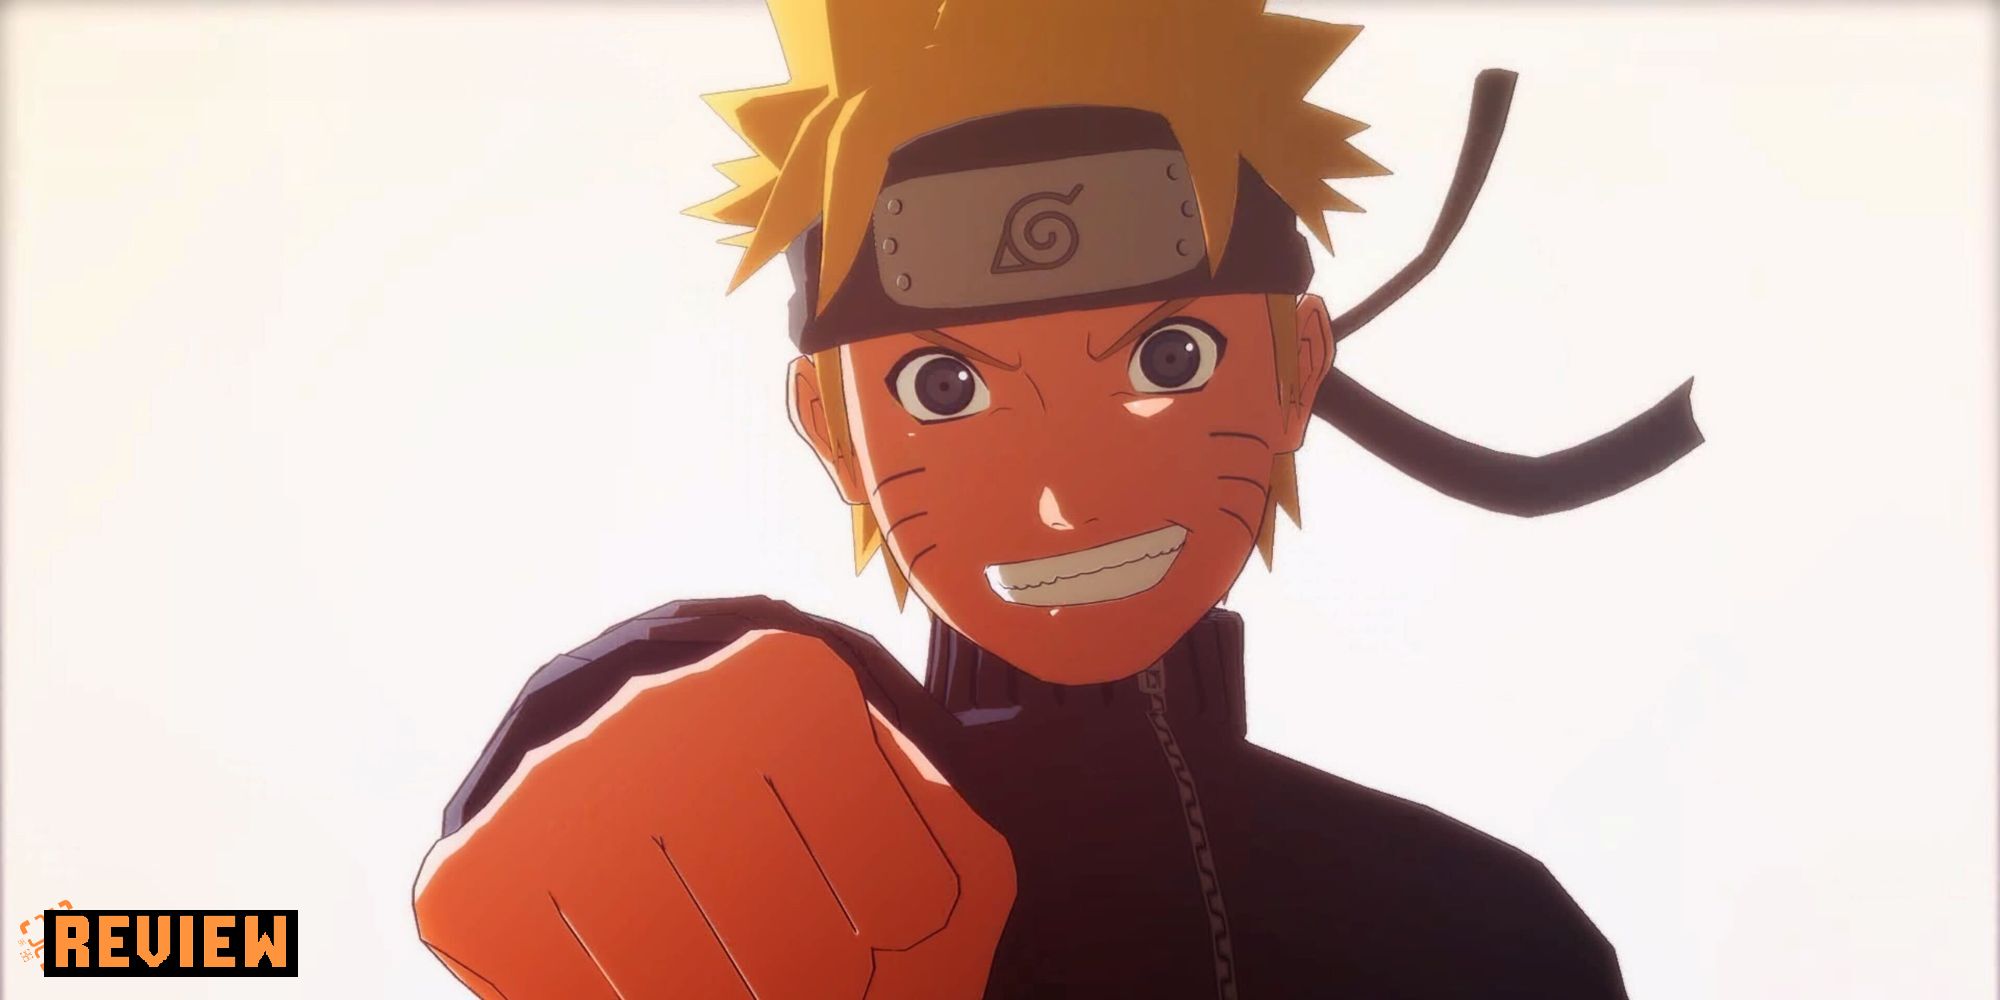 Naruto holding his fist out for Ultimate Ninja Storm Connections' review.